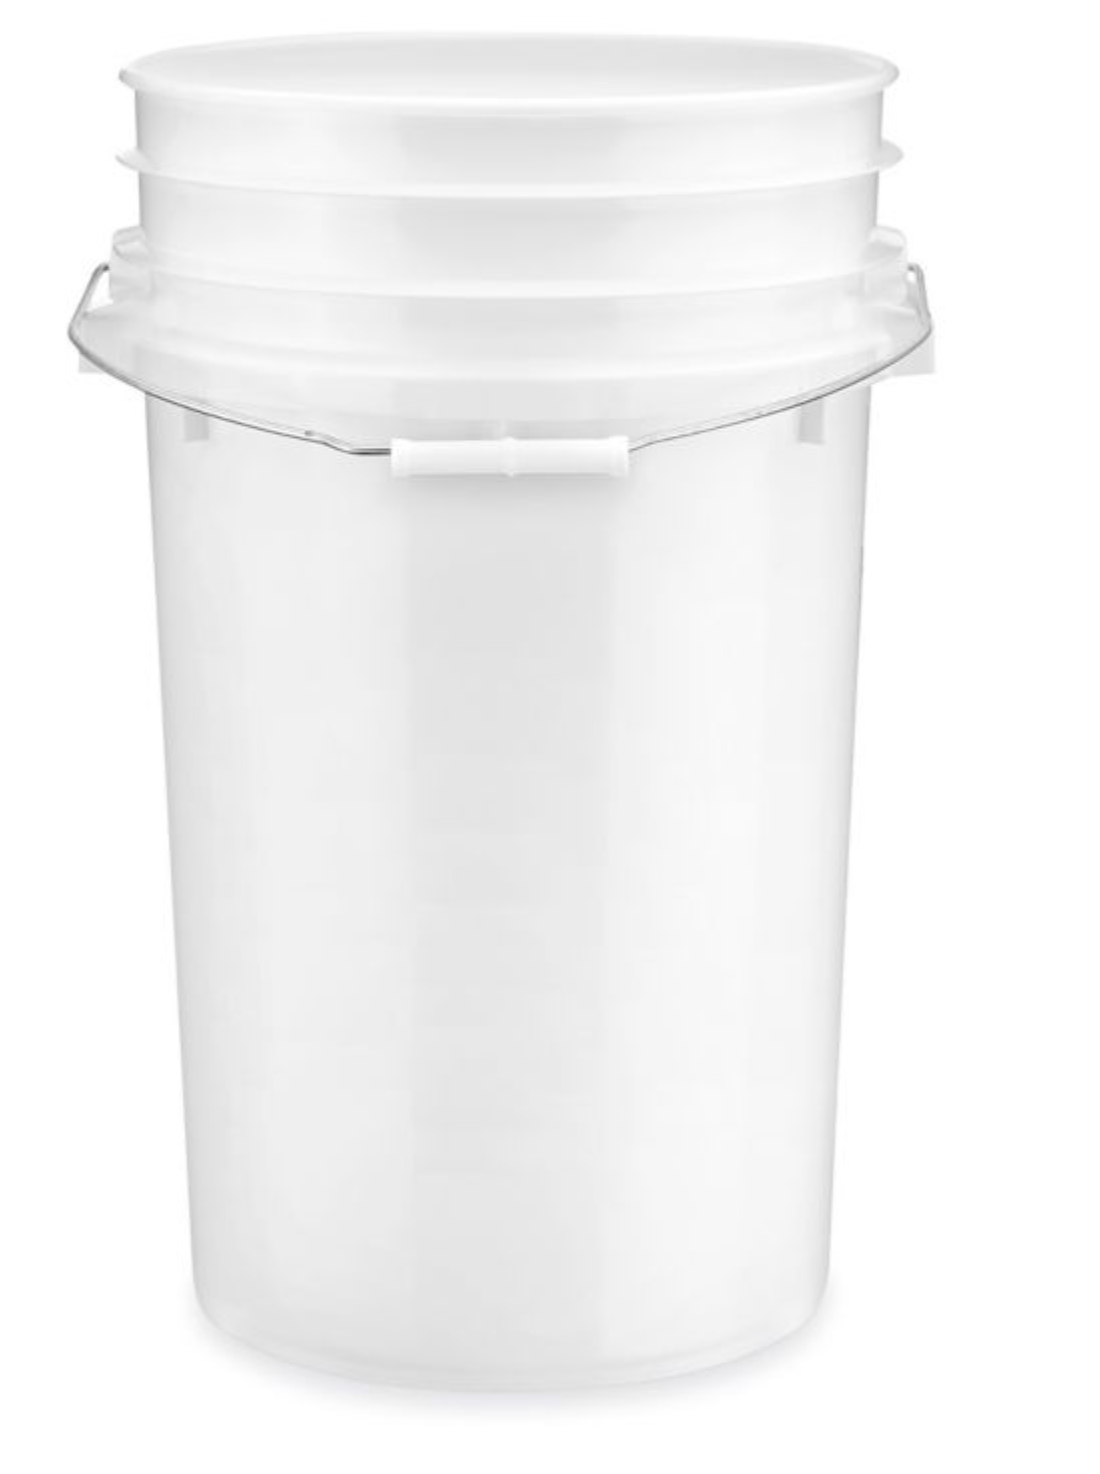 7 Gallon White Bucket with Lid - slightly used